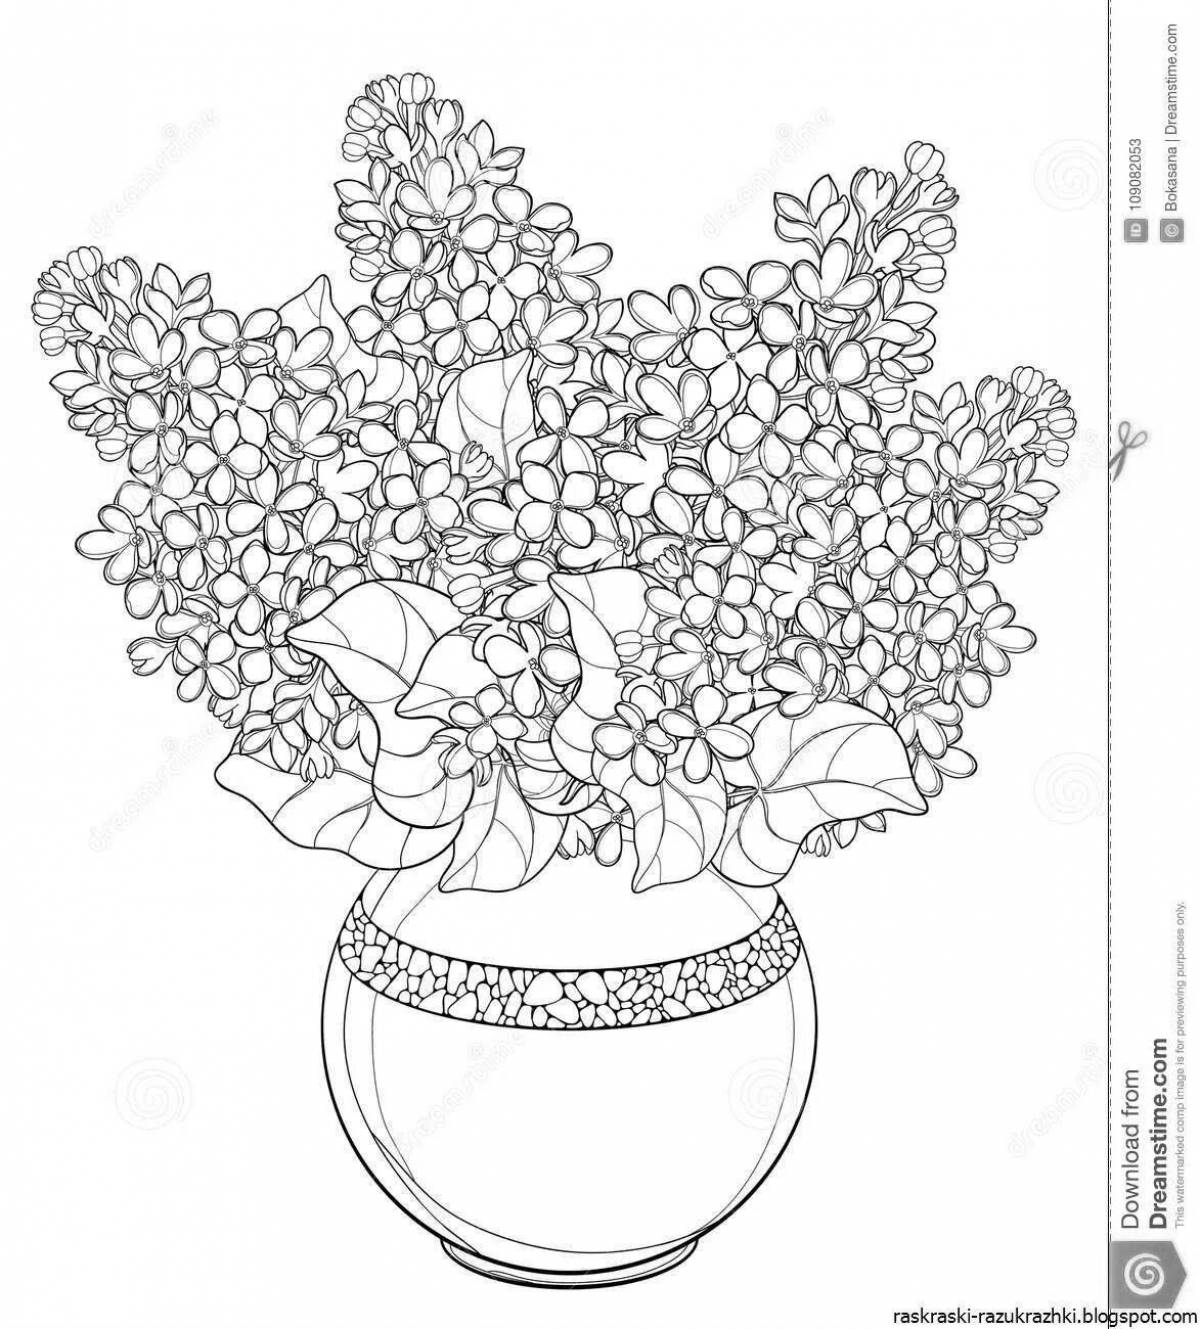 Coloring page playful winter bouquet